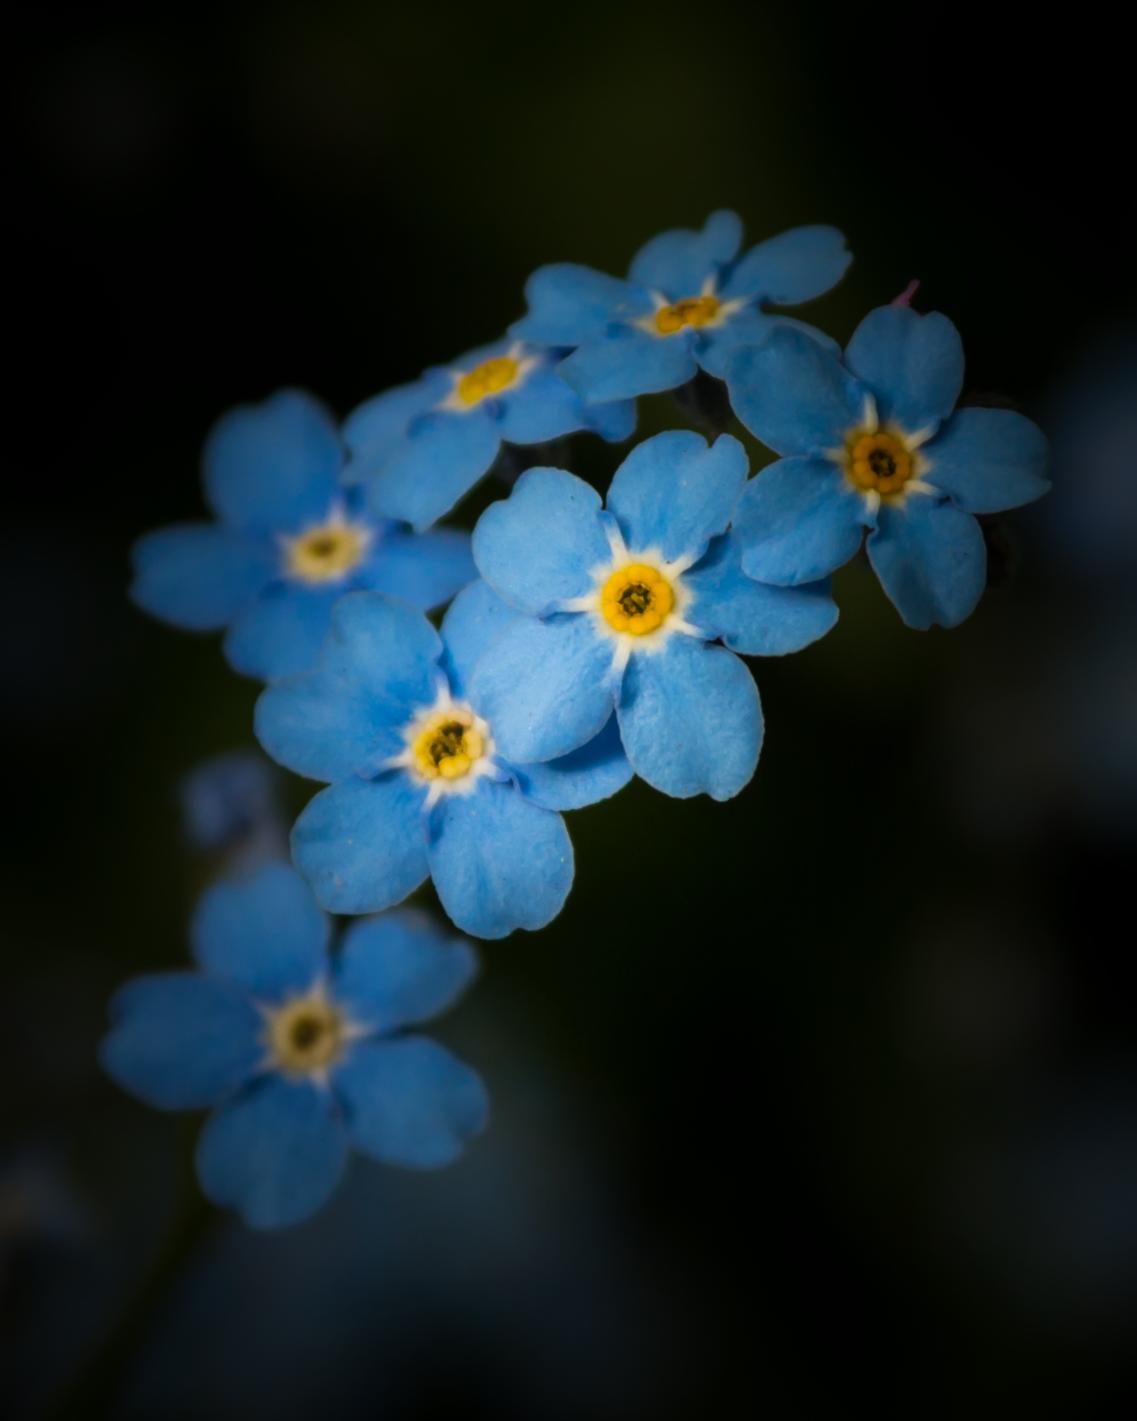 a group of blue flowers with small yellow centers